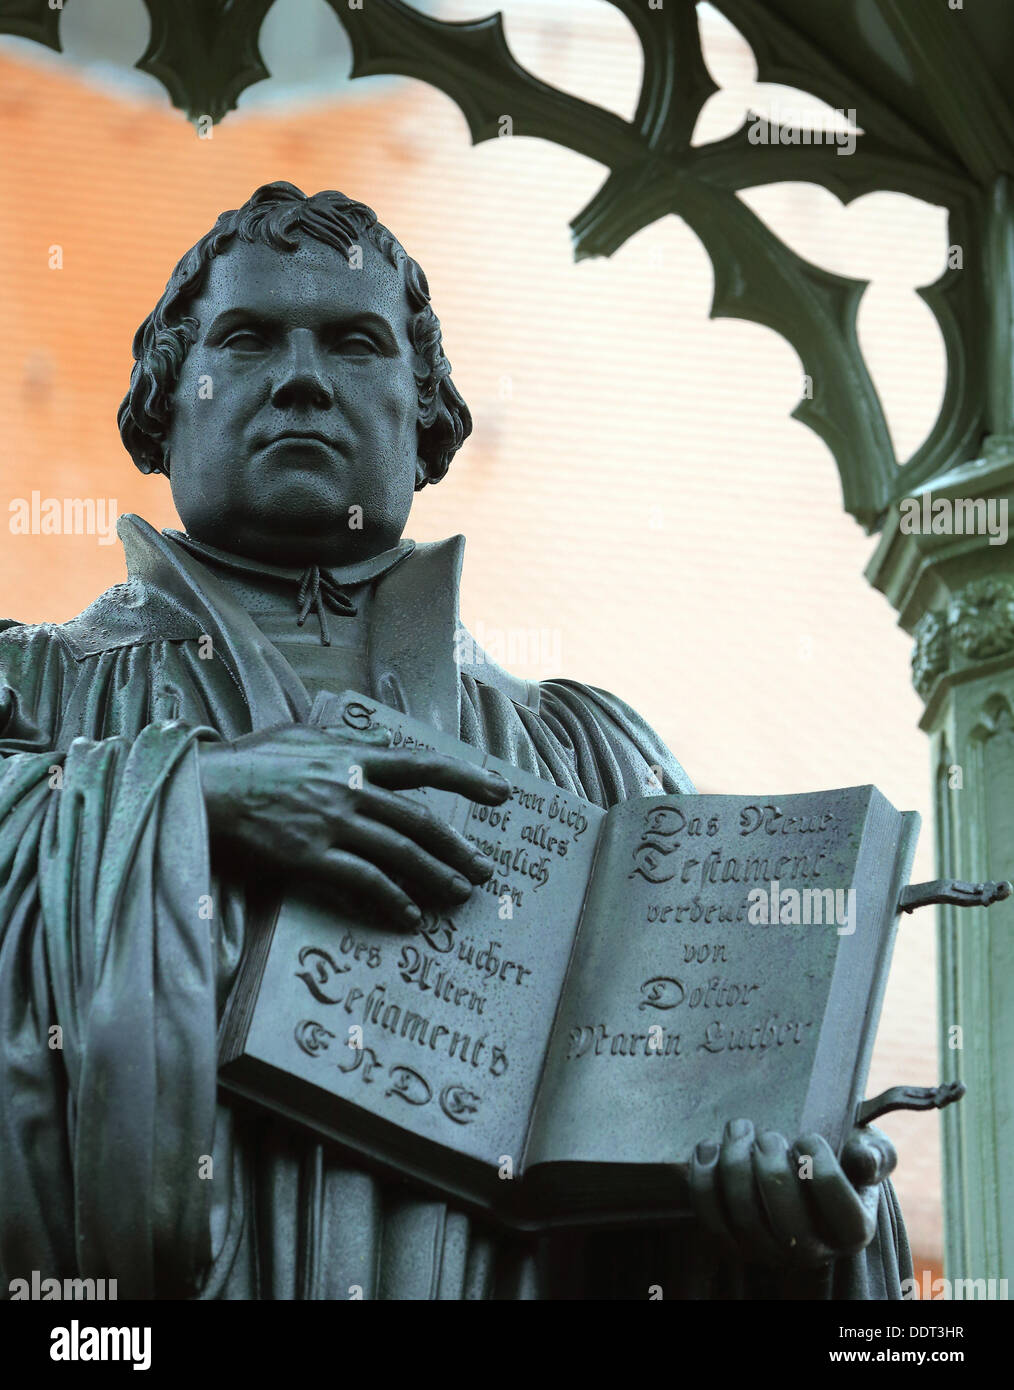 The monument for Martin Luther is pictured in Wittenberg, Germany, 02 September 2013. In this city, in 1517, the German reformer Martin Luther (1483-1546) posted his 95 his theses against the selling of indulgences at the door of the All Saints' Church. Photo: JENS WOLF Stock Photo